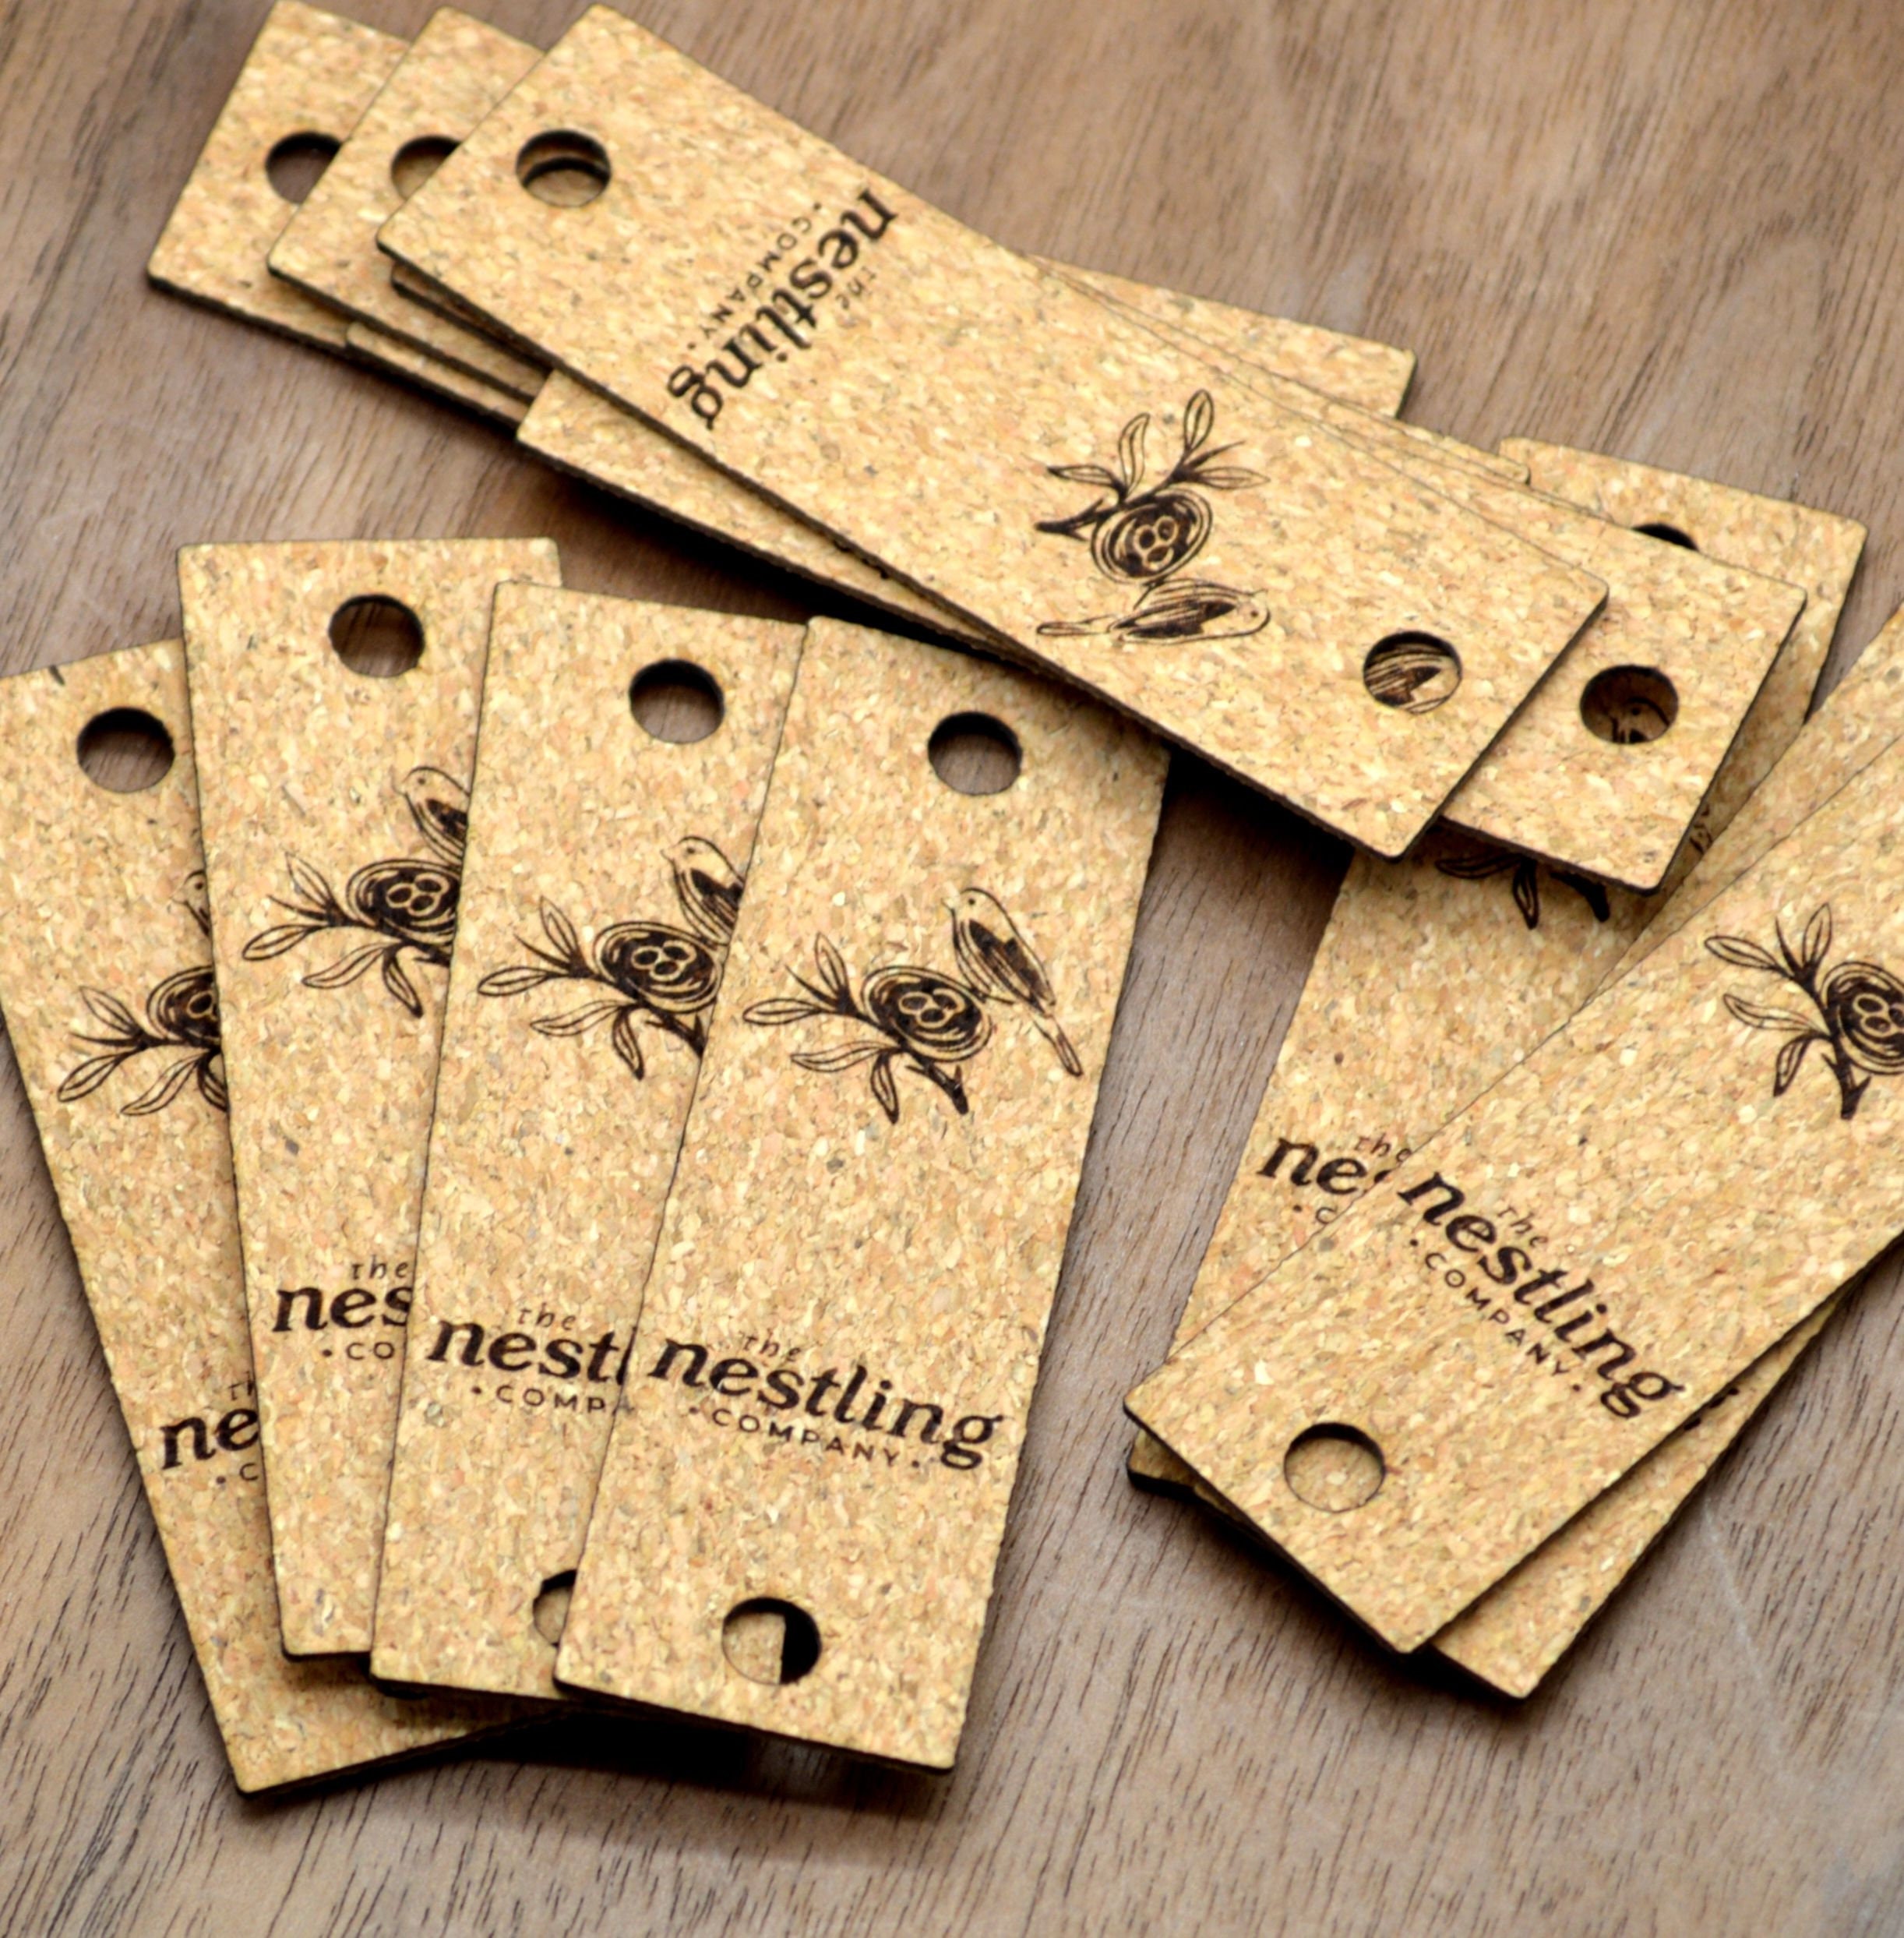 Cork Fabric Labels 0.75 x 2 inches, sold in sets of 25 - allthiswood